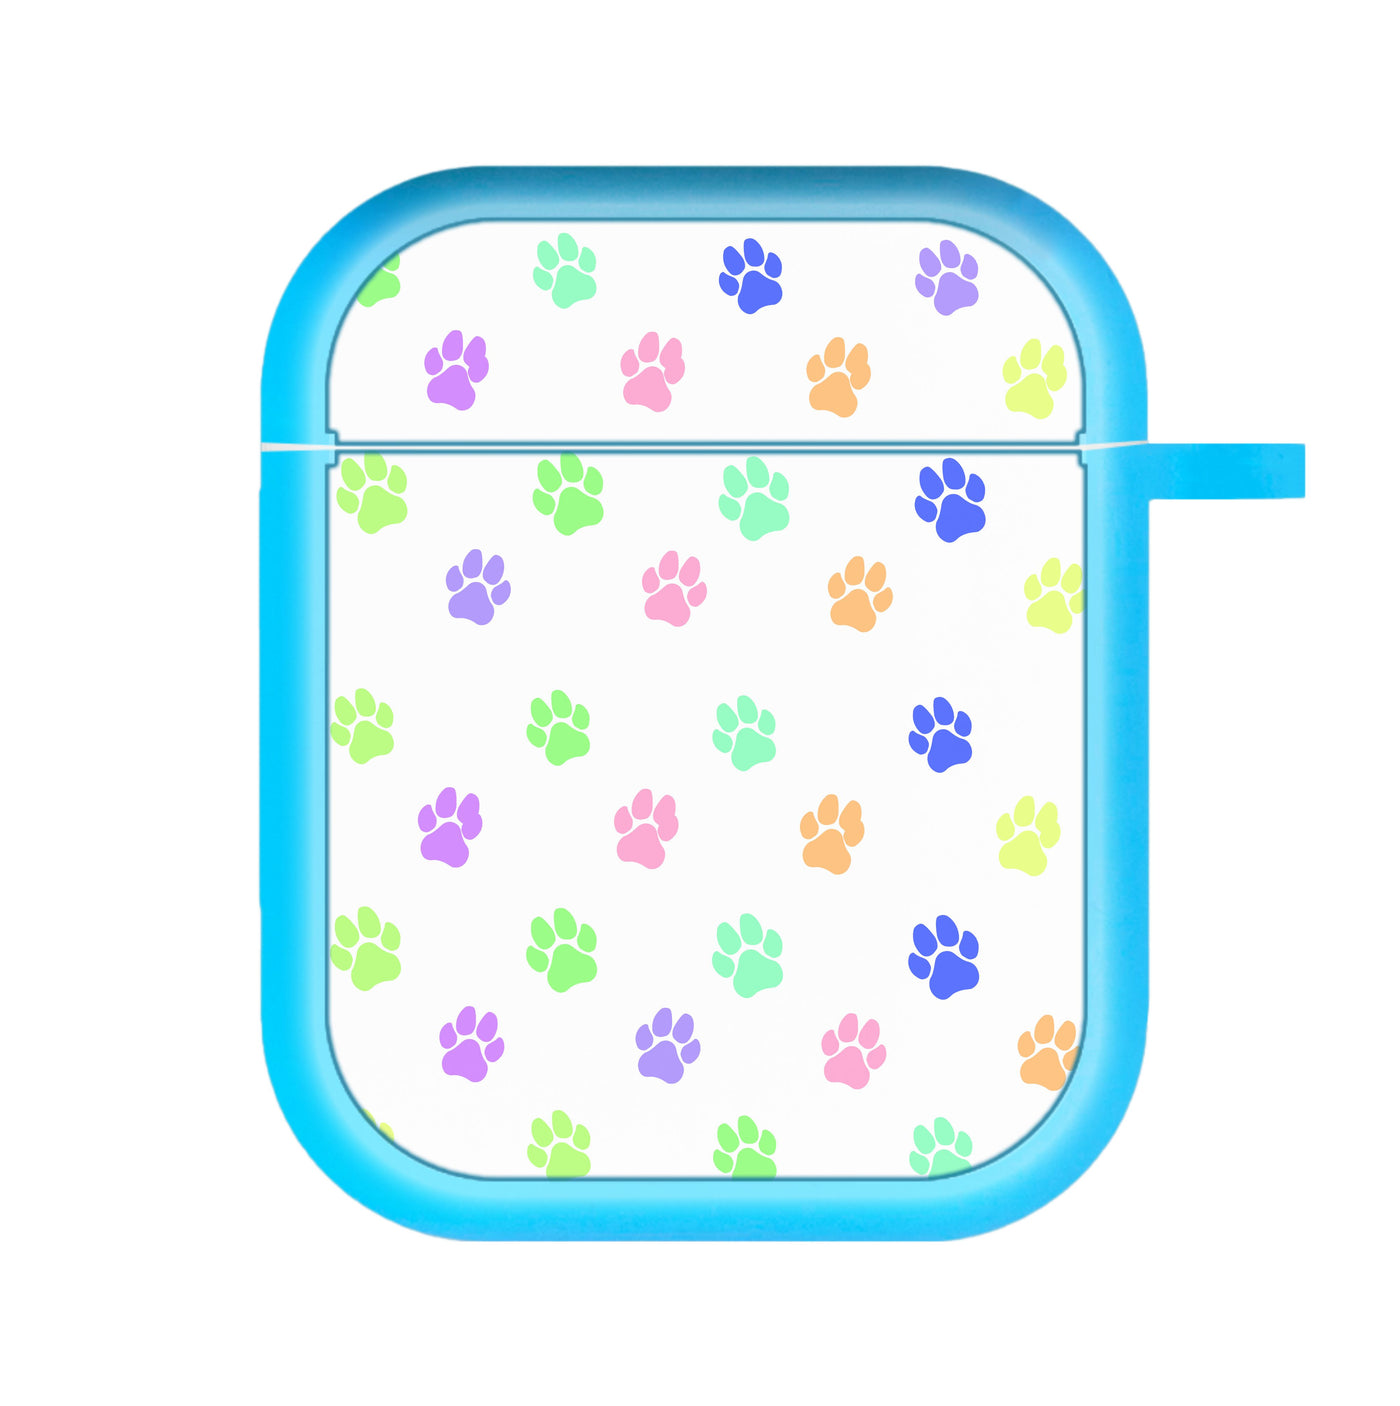 Coloured patterns - Dog Patterns AirPods Case